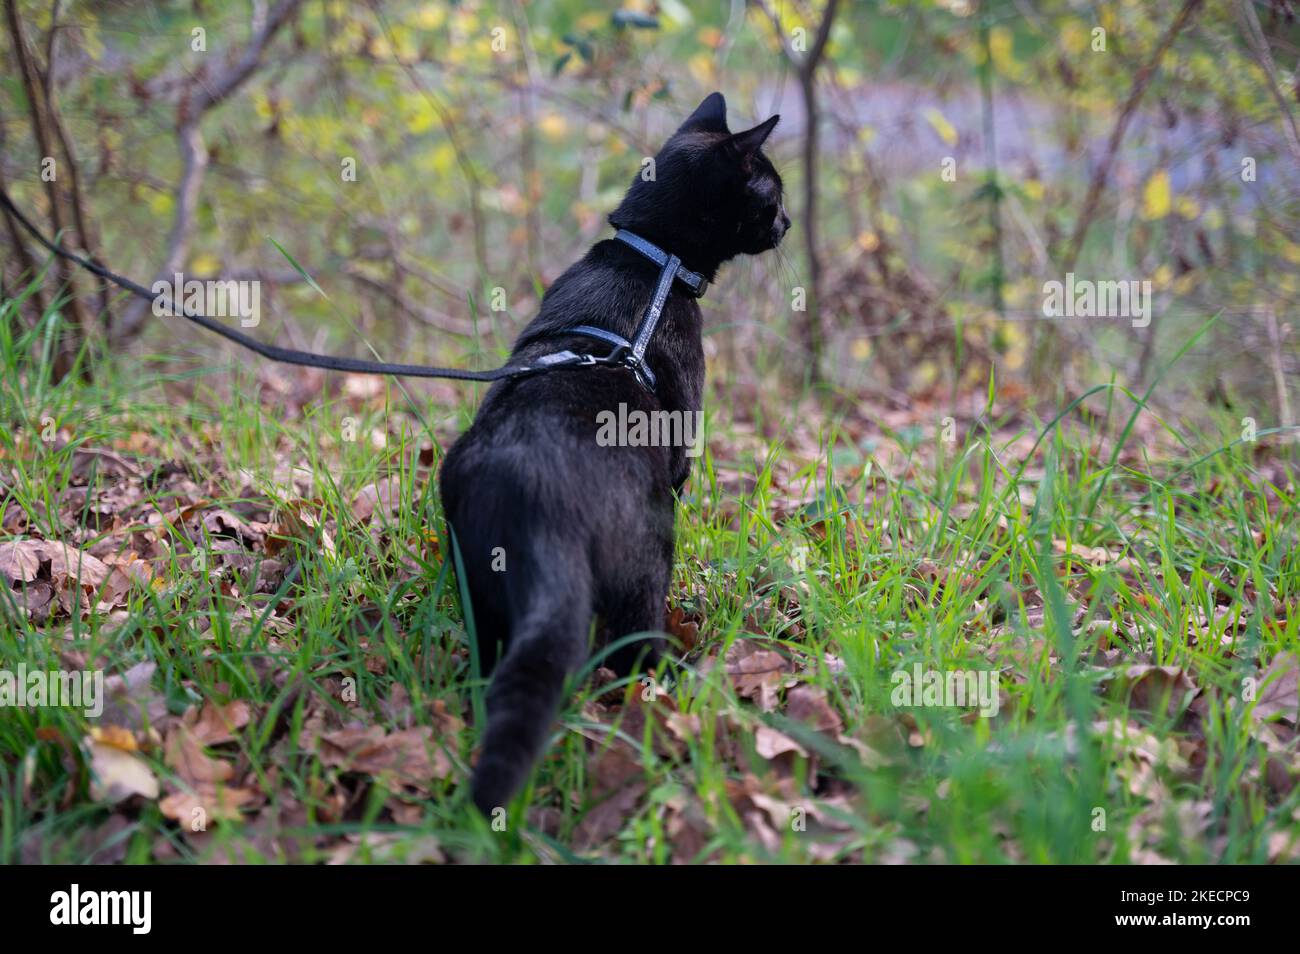 Black cat on a leash  in the green grass on a meadow Stock Photo